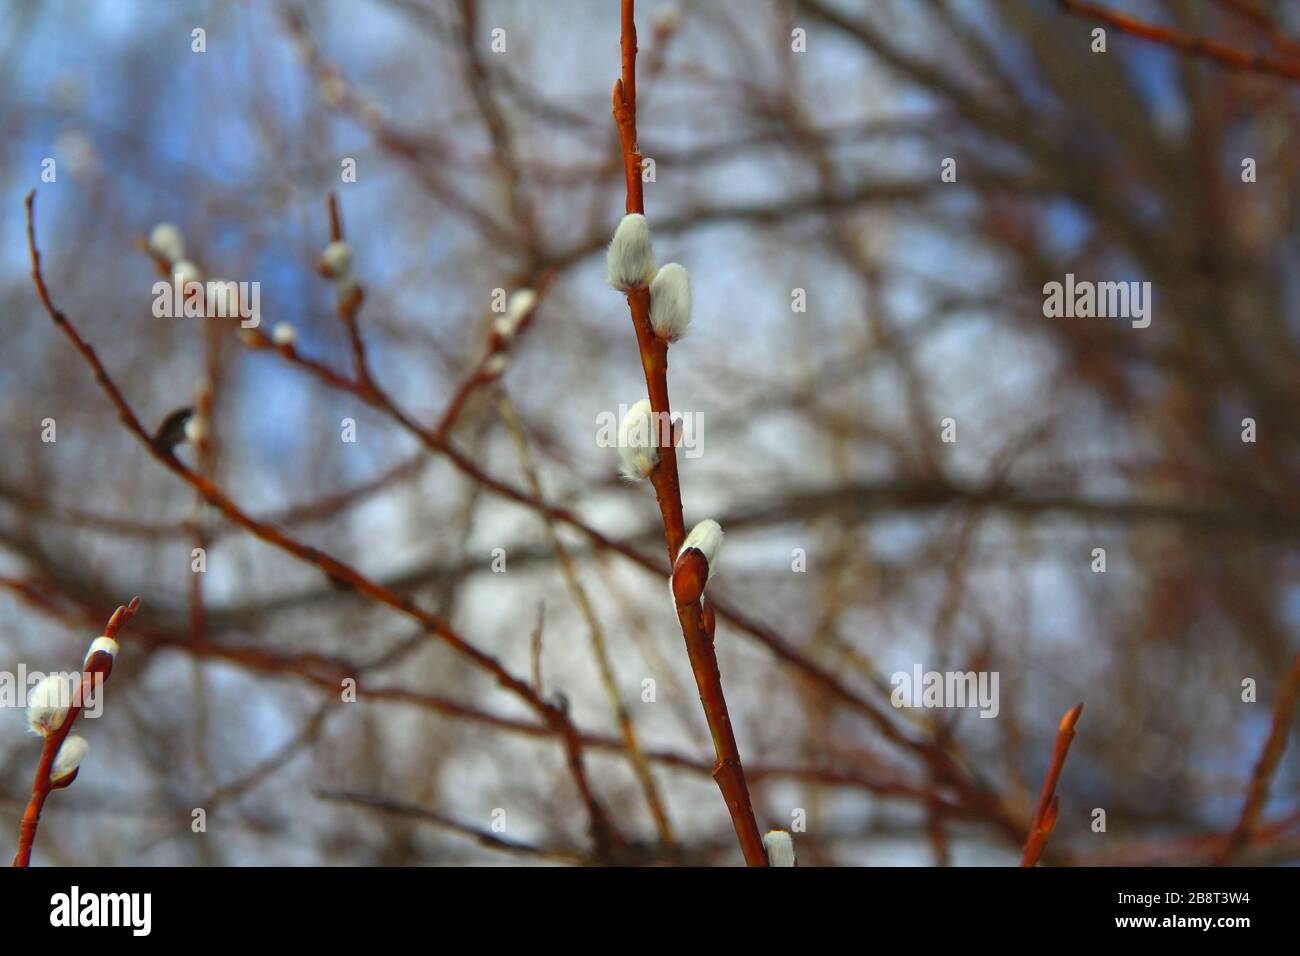 White fluffy willow buds on thin branches of brown-orange color. The concept of spring, warming and changing seasons. Stock Photo